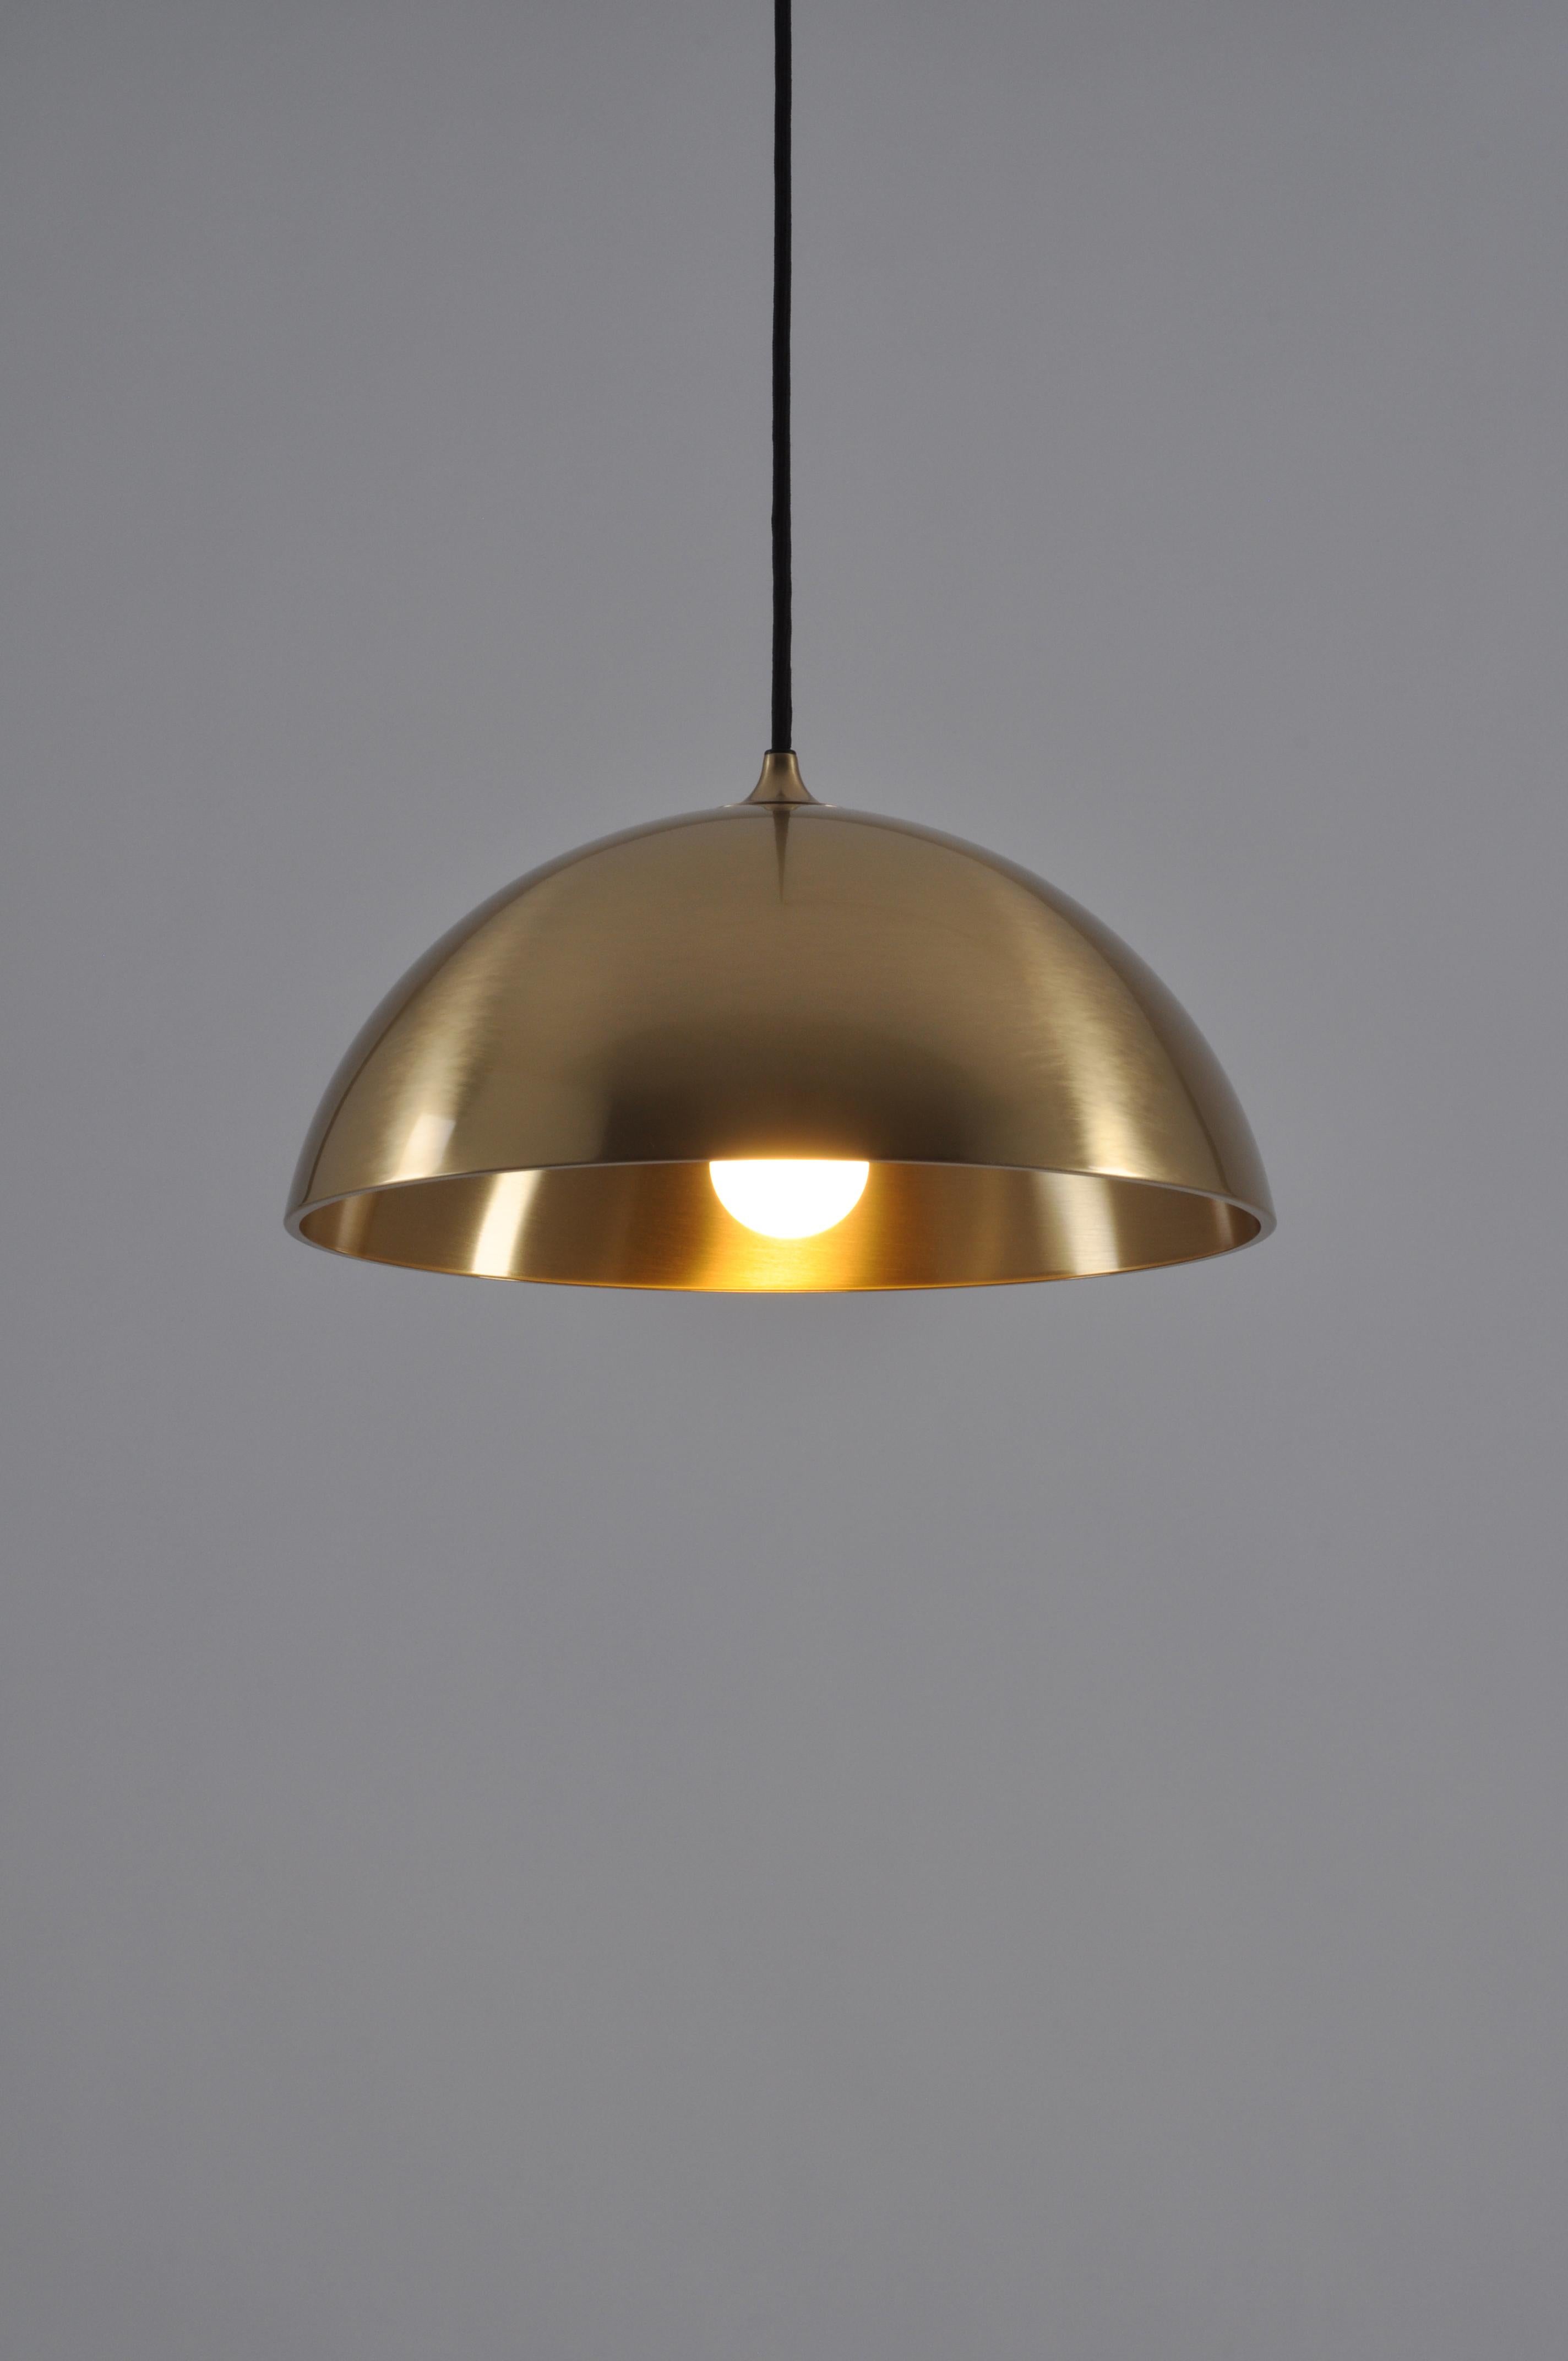 Mid-Century Modern Florian Schulz Duos 36 Pendant Lamp in Polished Brass or Nickel For Sale